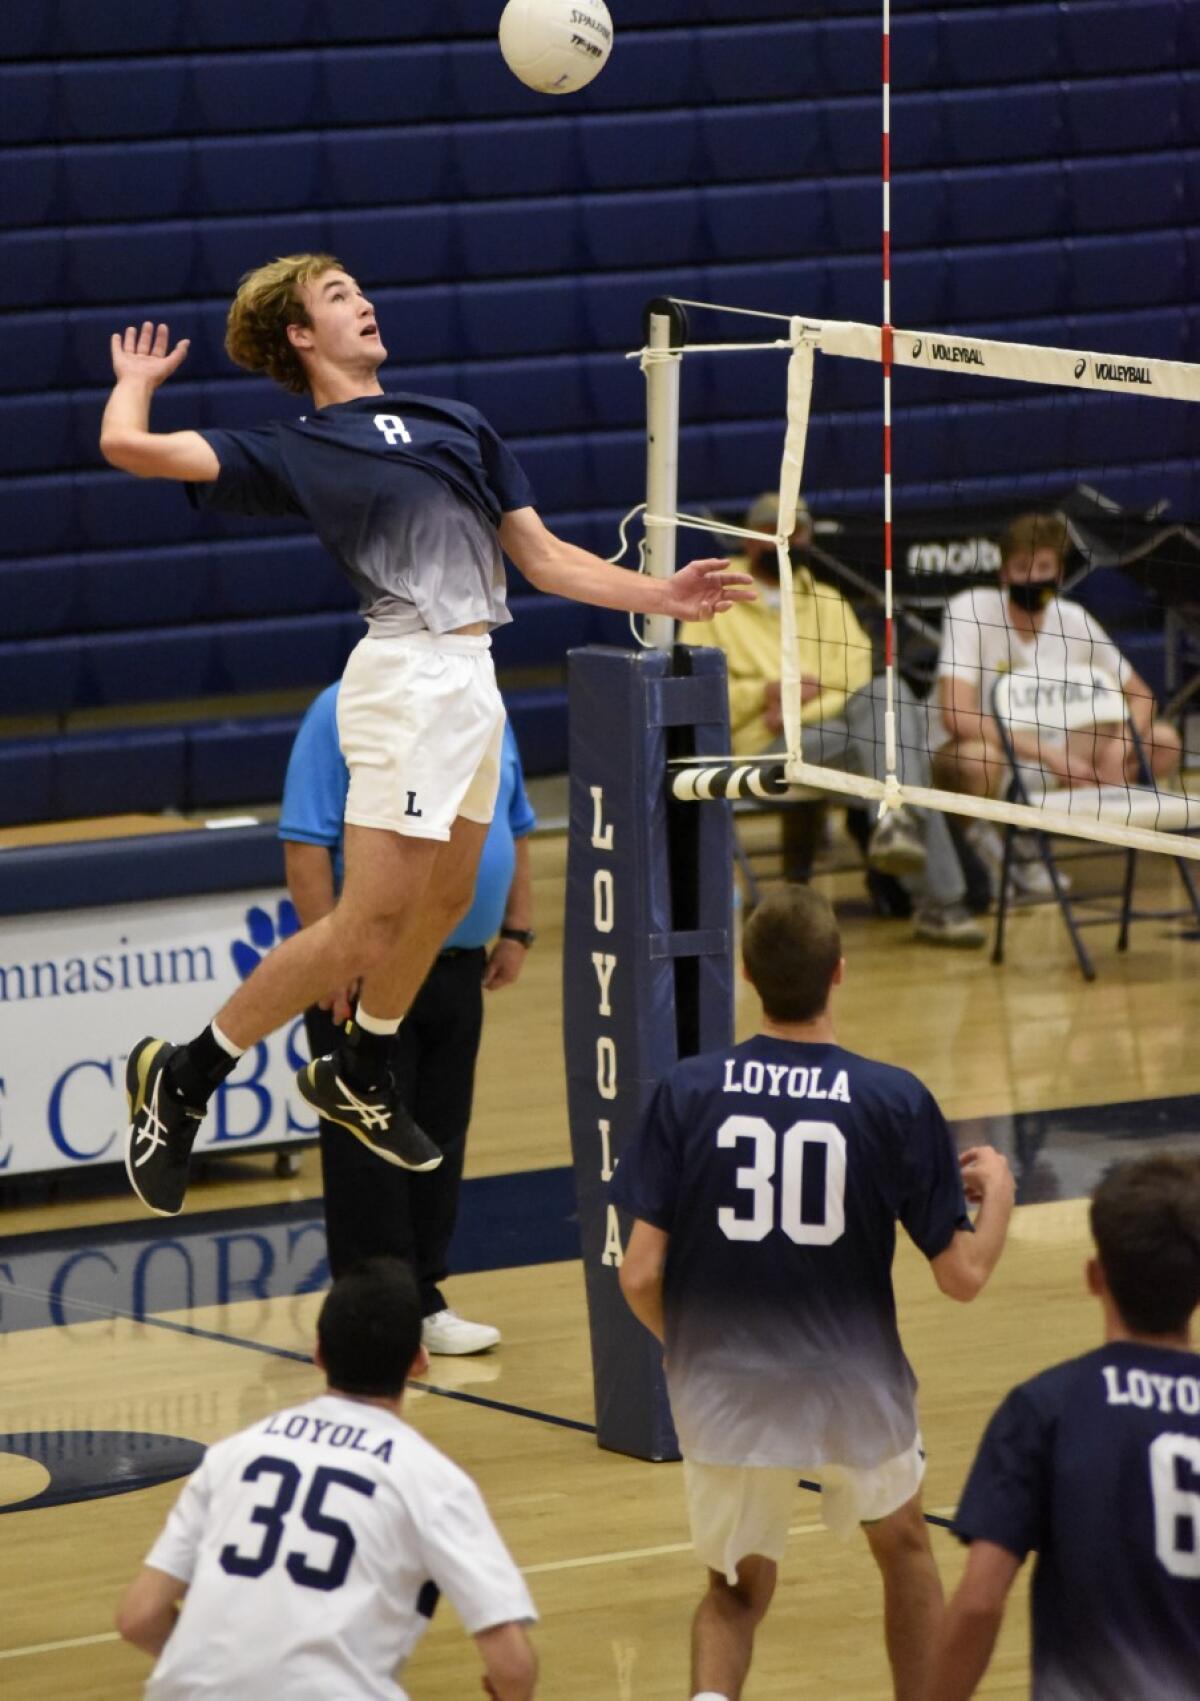 Dillon Klein of Loyola leaps for a shot against Mira Costa .